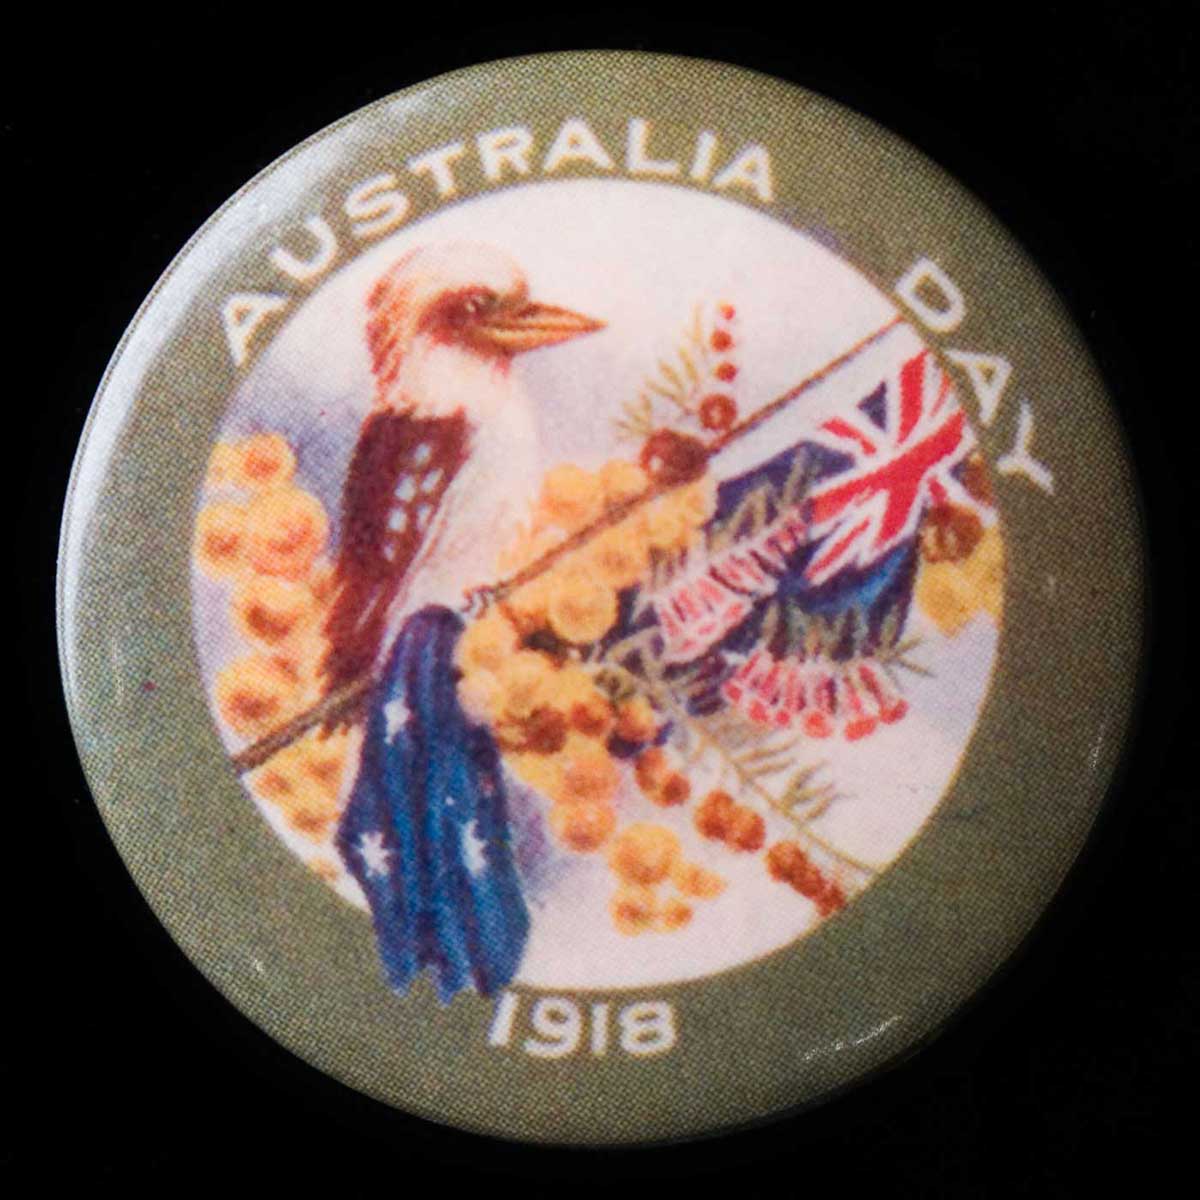 Circular badge with an olive-coloured border with the words 'Australia Day 1918' printed in white. The central image shows a kookaburra sitting on an Australian flag, surrounded by yellow wattle blossoms and red trumpet-like flowers. - click to view larger image